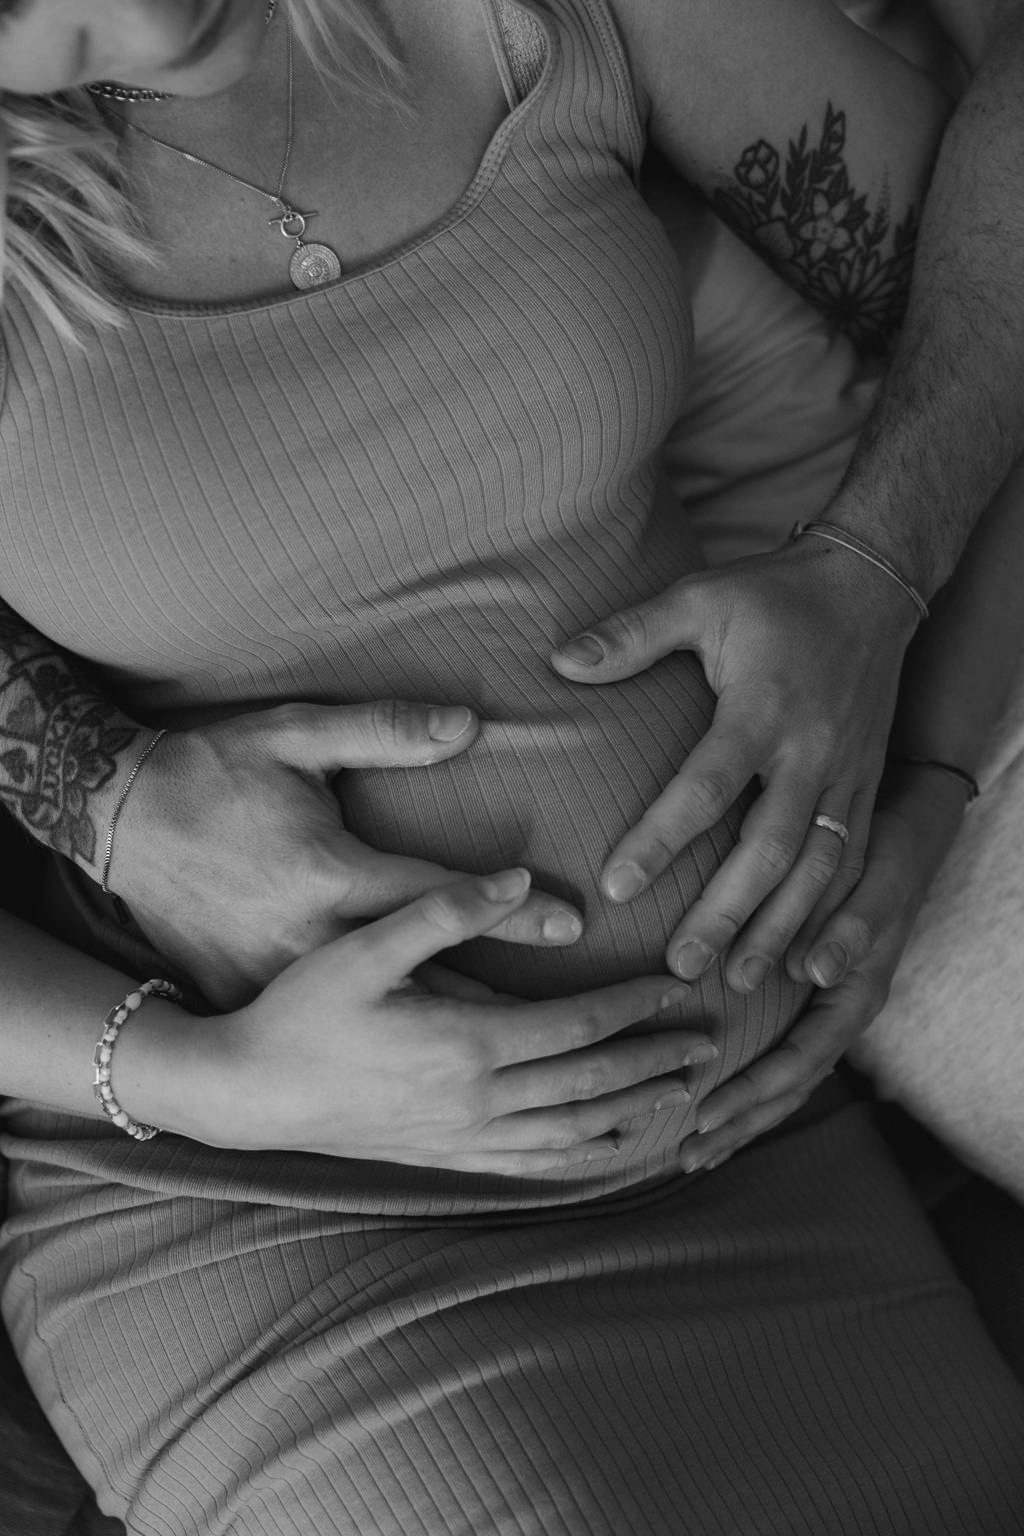 black and white photo close up woman's pregnant belly her and the father's hands are placed on it